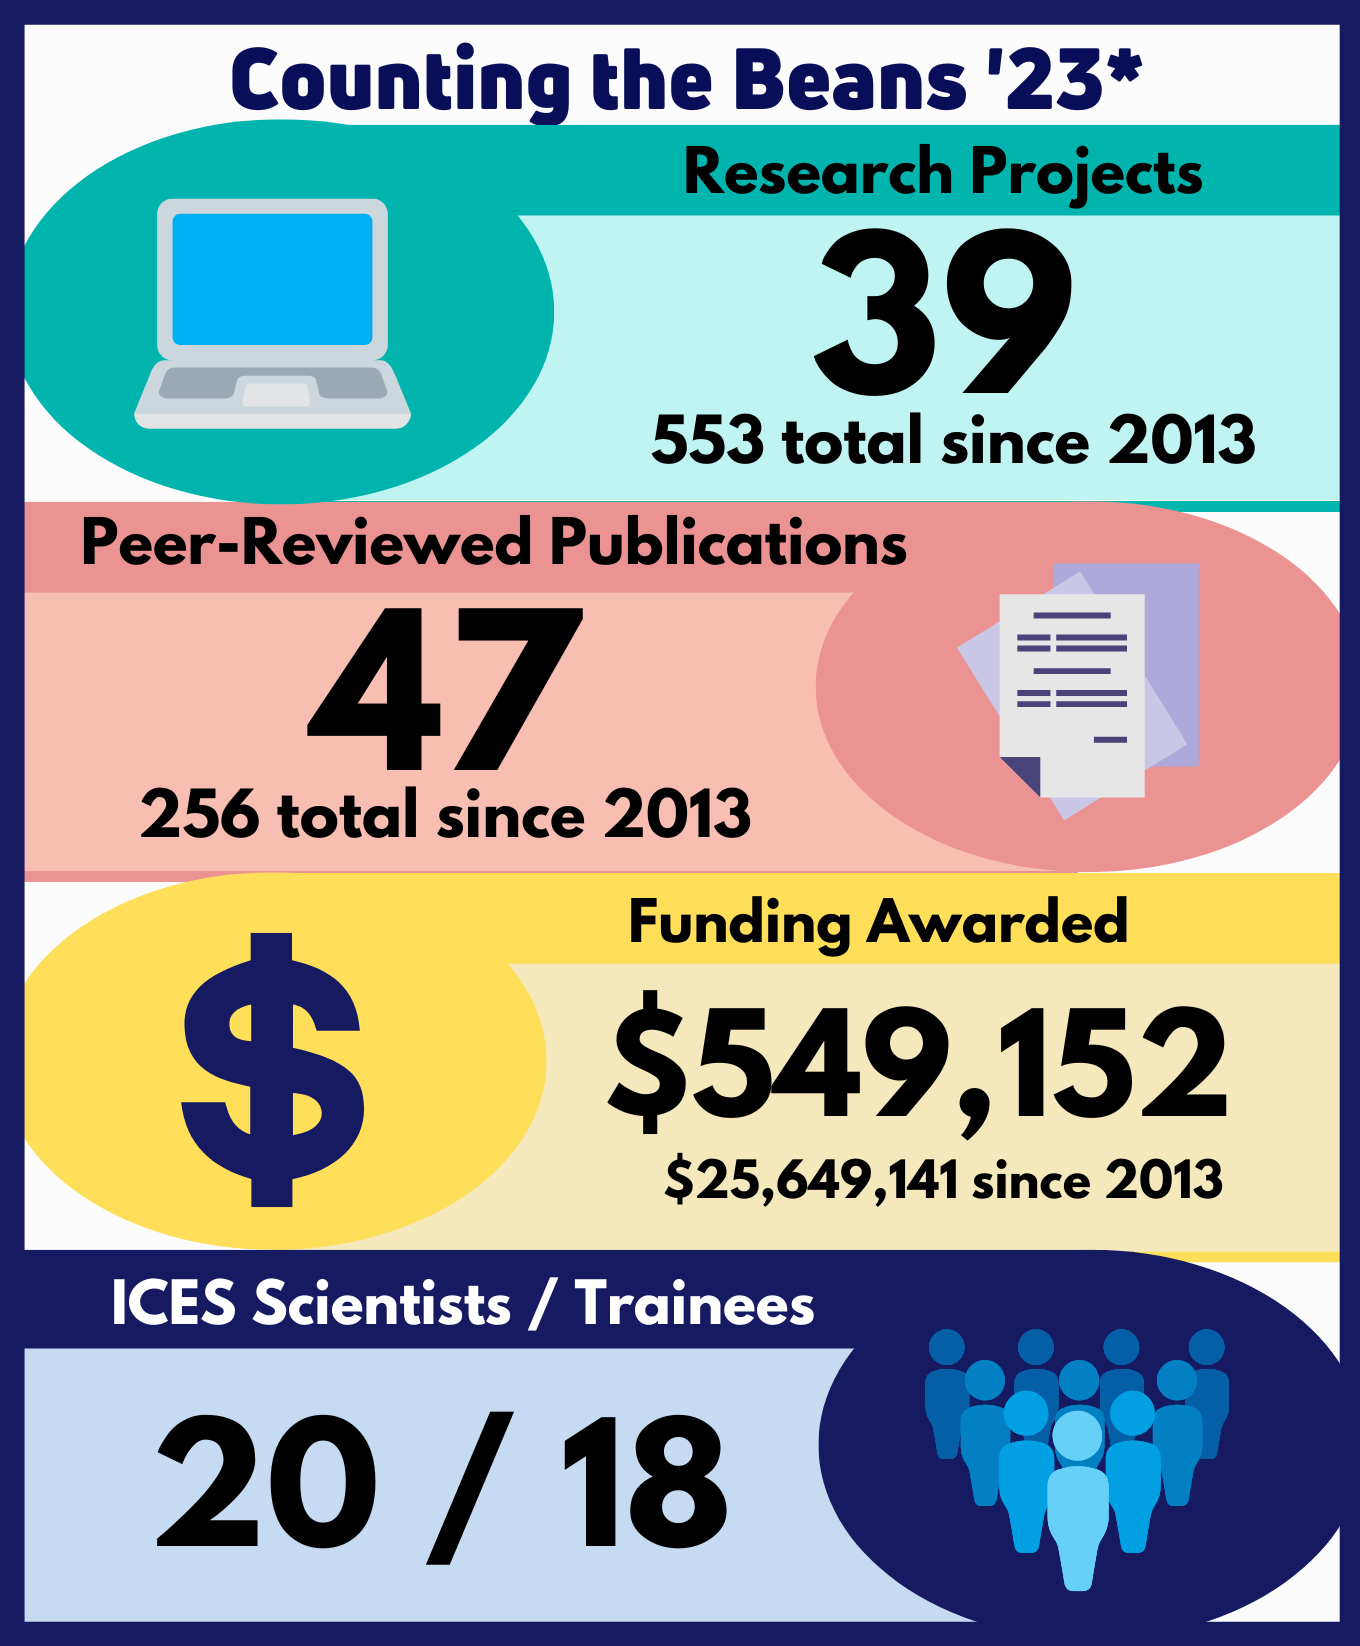 Counting the Beans 2023 Infographic: 39 Research projects in FY2023, 553 total since 2013; 47 Peer-reviewed publications in FY2023, 256 total since 2013; $549,152 Funding Awarded in FY2023, $25,649,141 since 2013; 20 ICES KDT Scientists and 18 Trainees active in FY2023